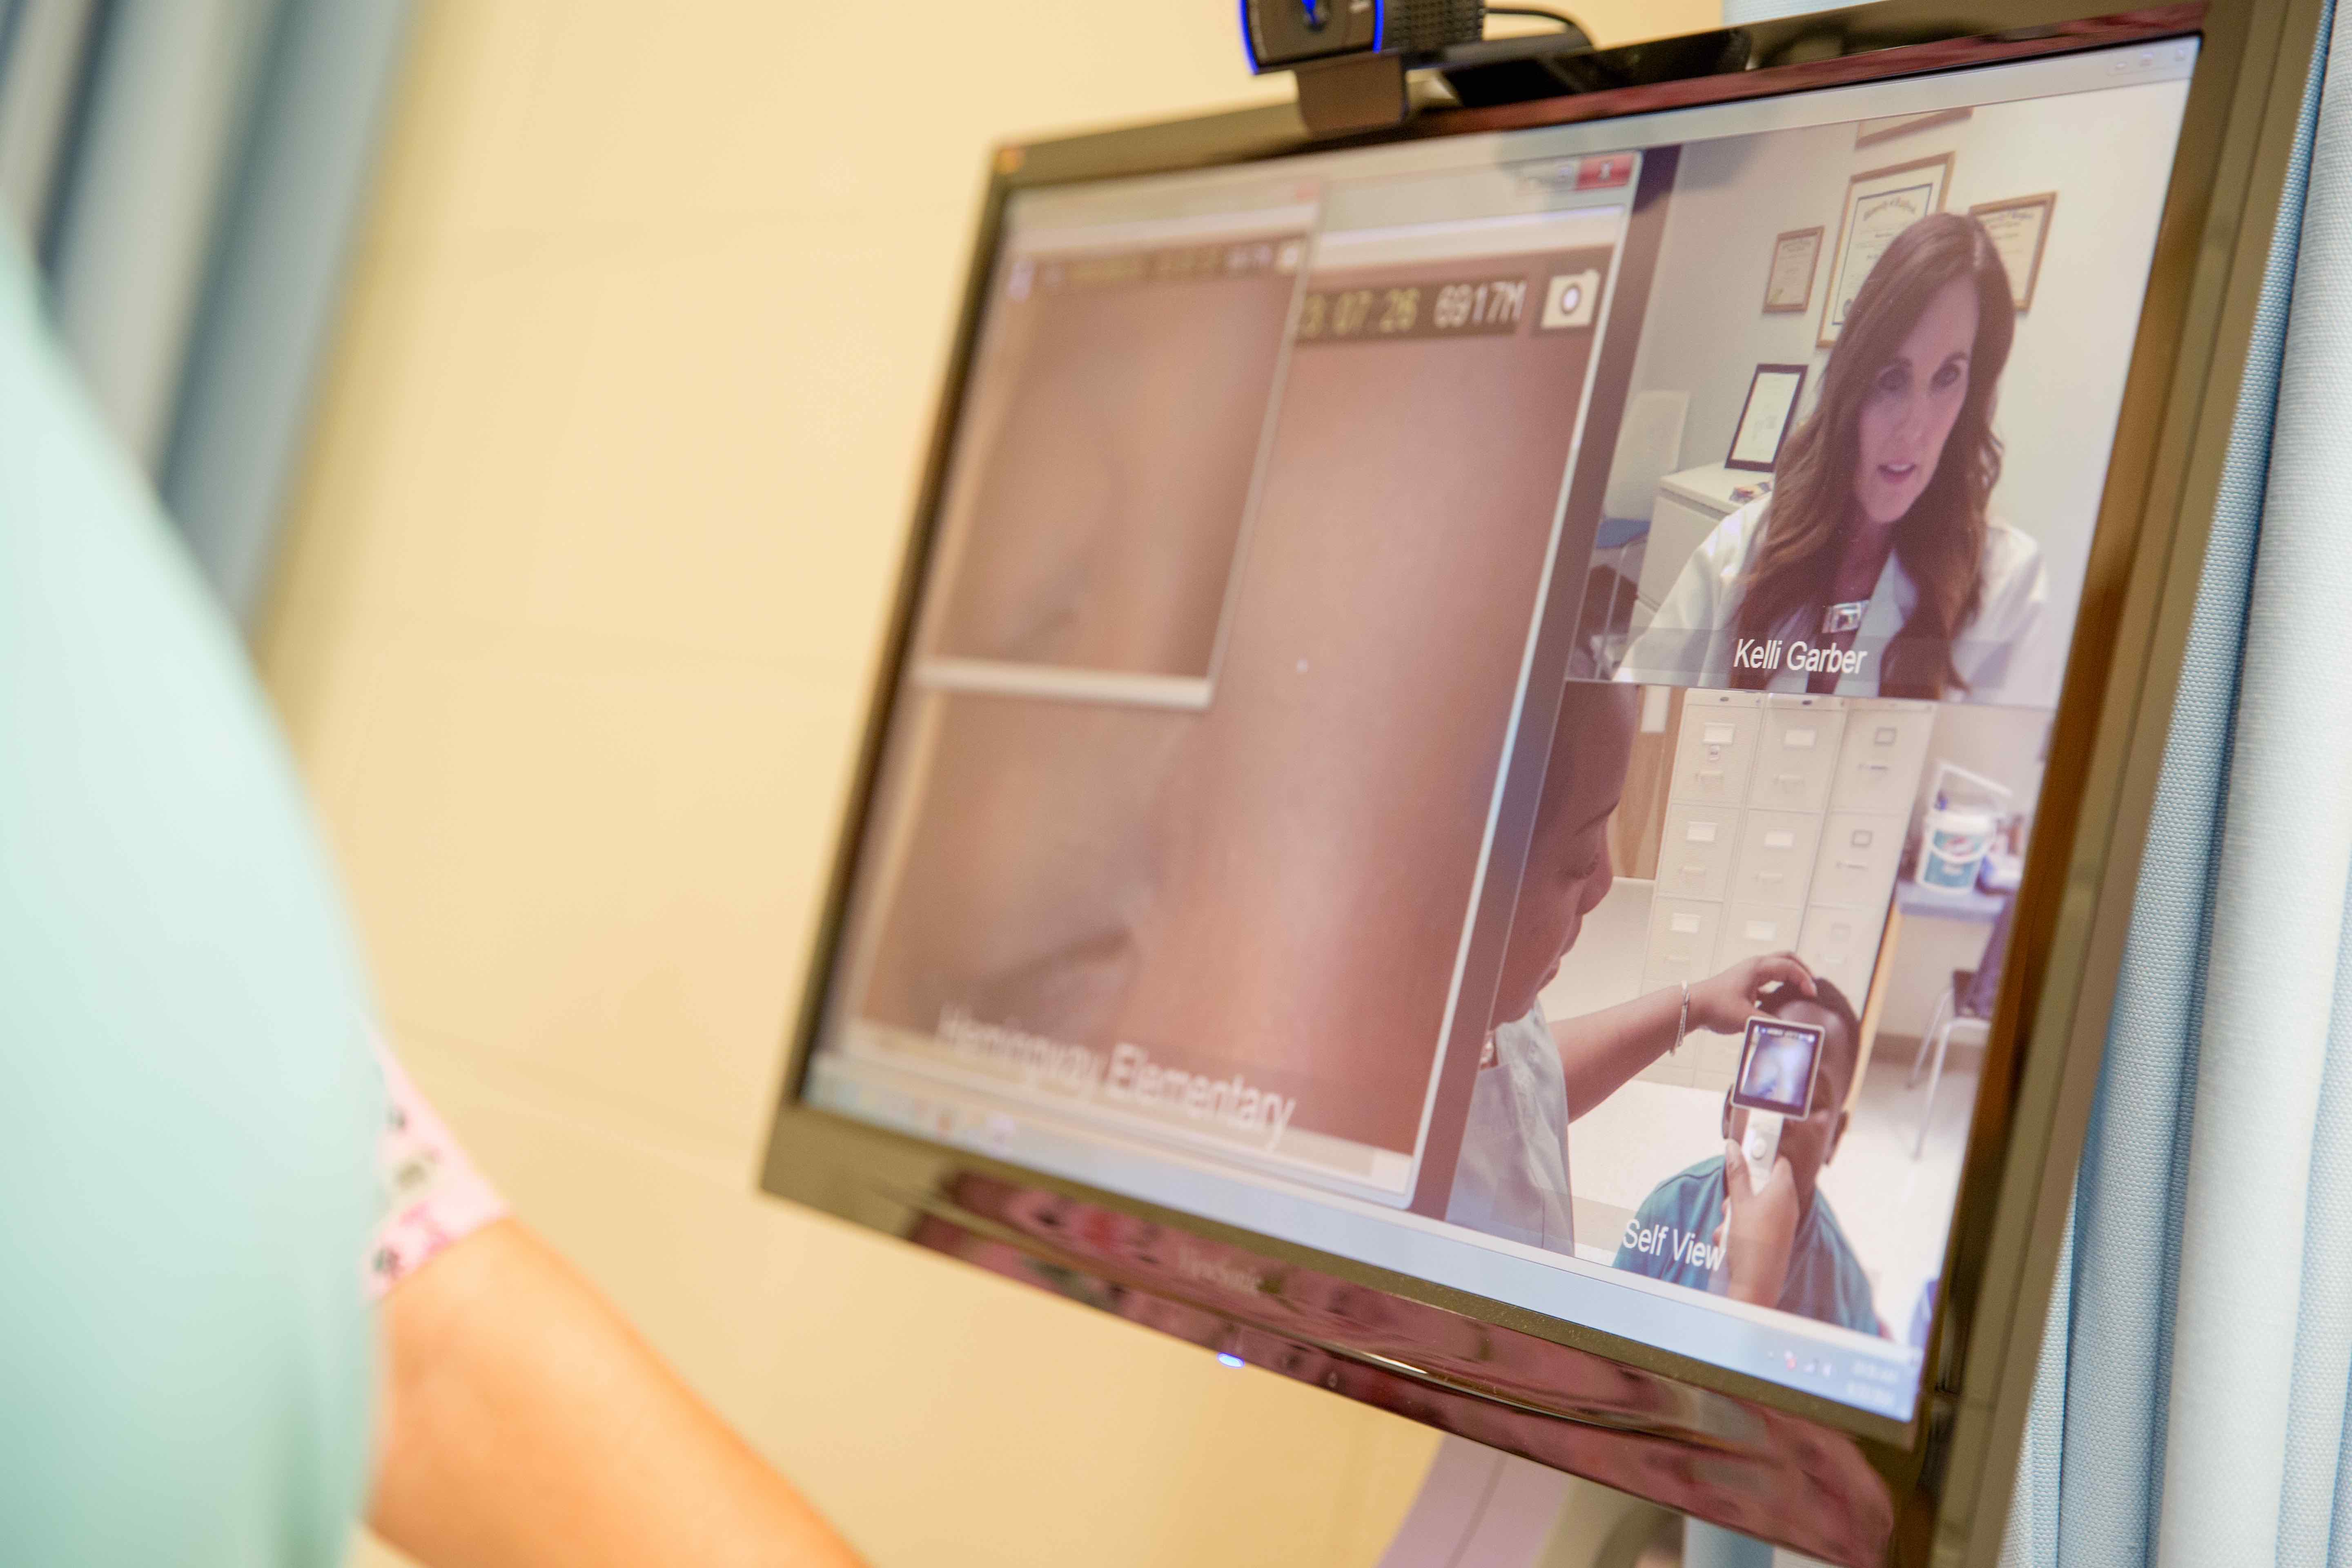 Close-up of Telehealth monitor showing Kelli Garber, MSN, APRN, lead nurse practitioner & clinical integration specialist at the Medical University of South Carolina Center for Telehealth, and a student